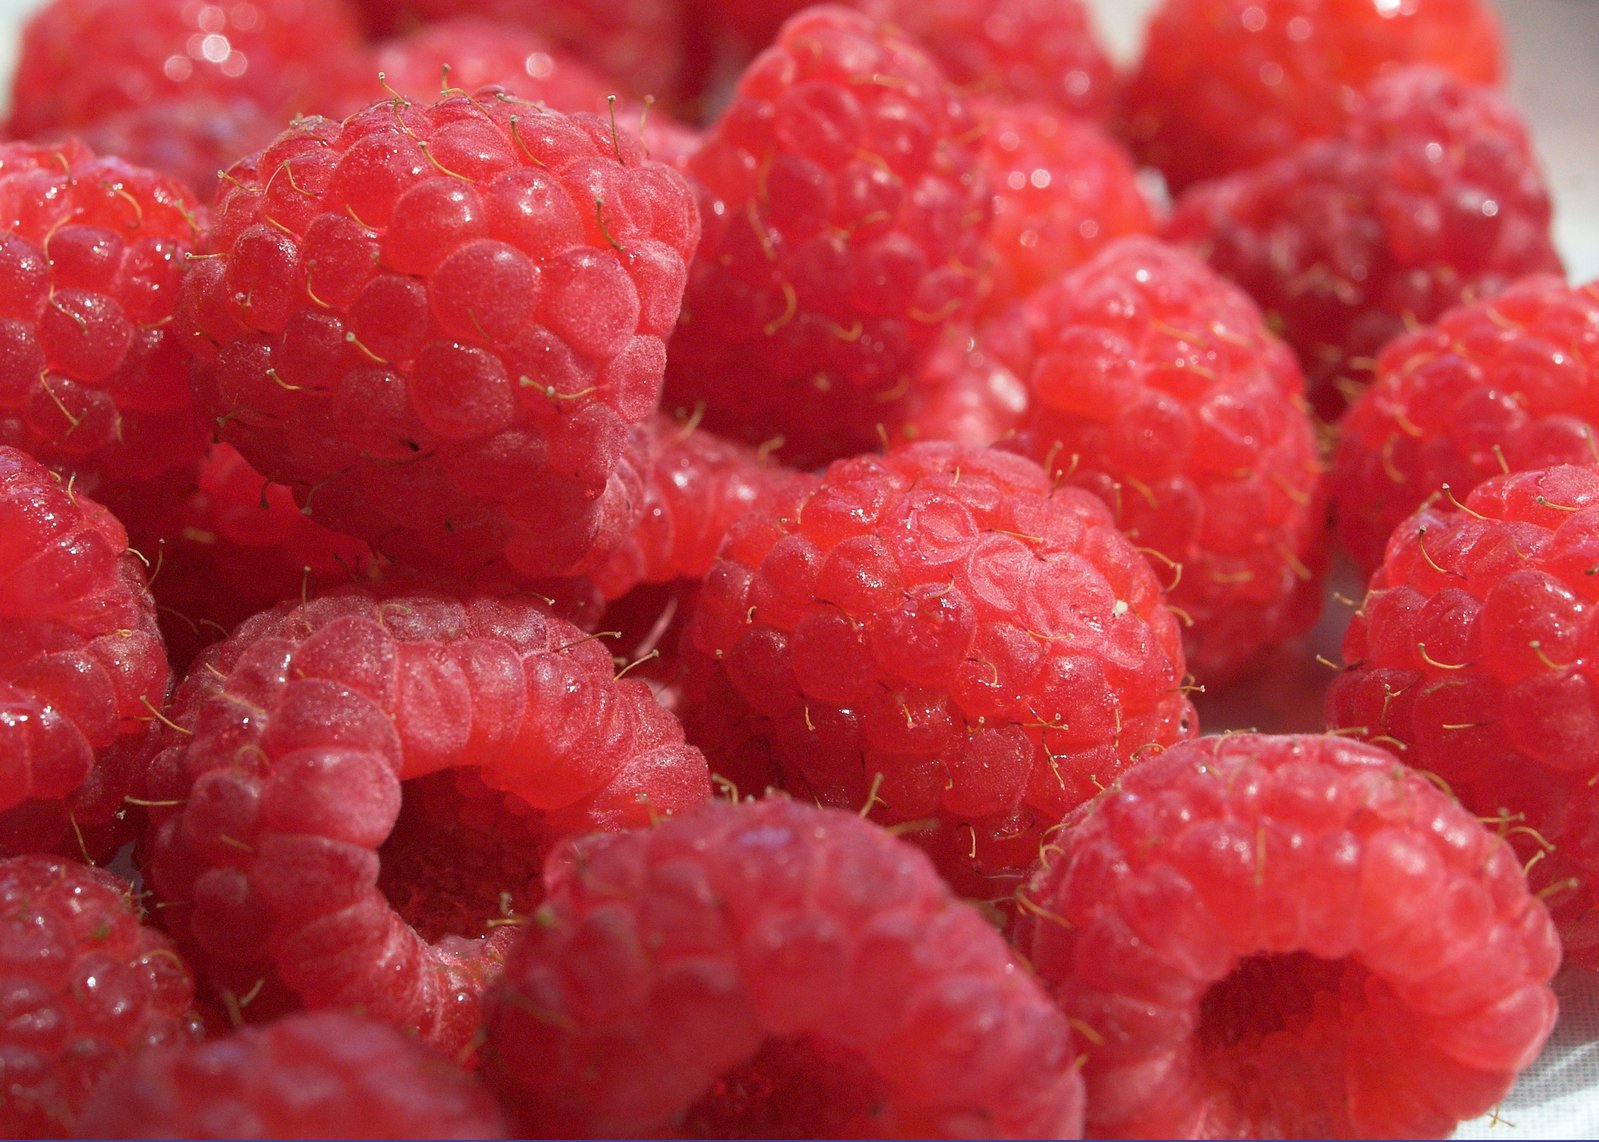 fresh raspberries are sitting on the table